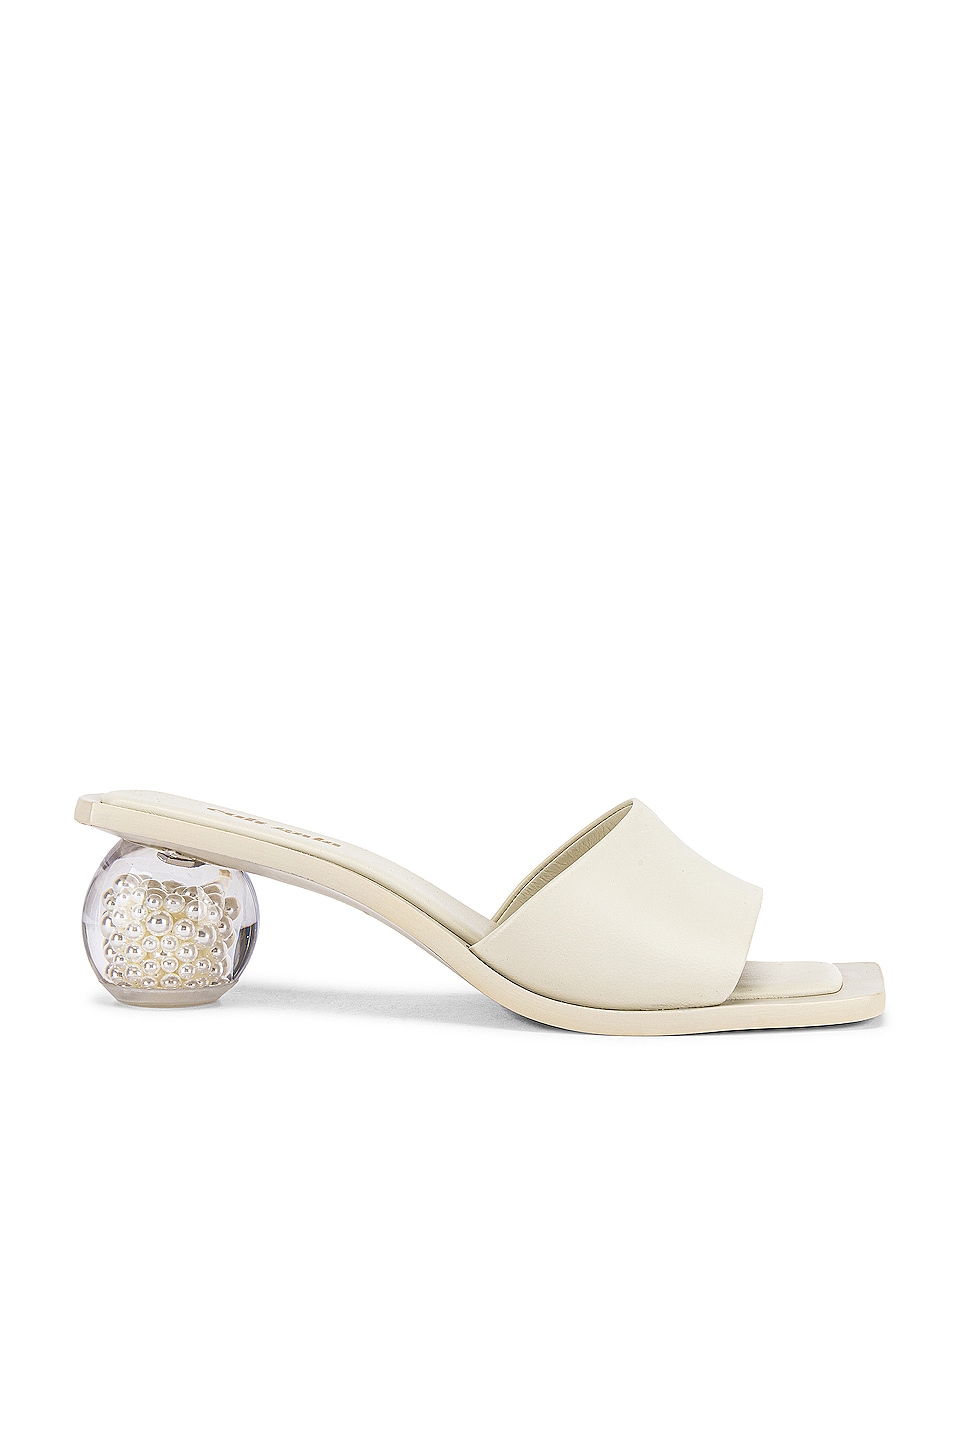 Buy > cult gaia white sandals > in stock